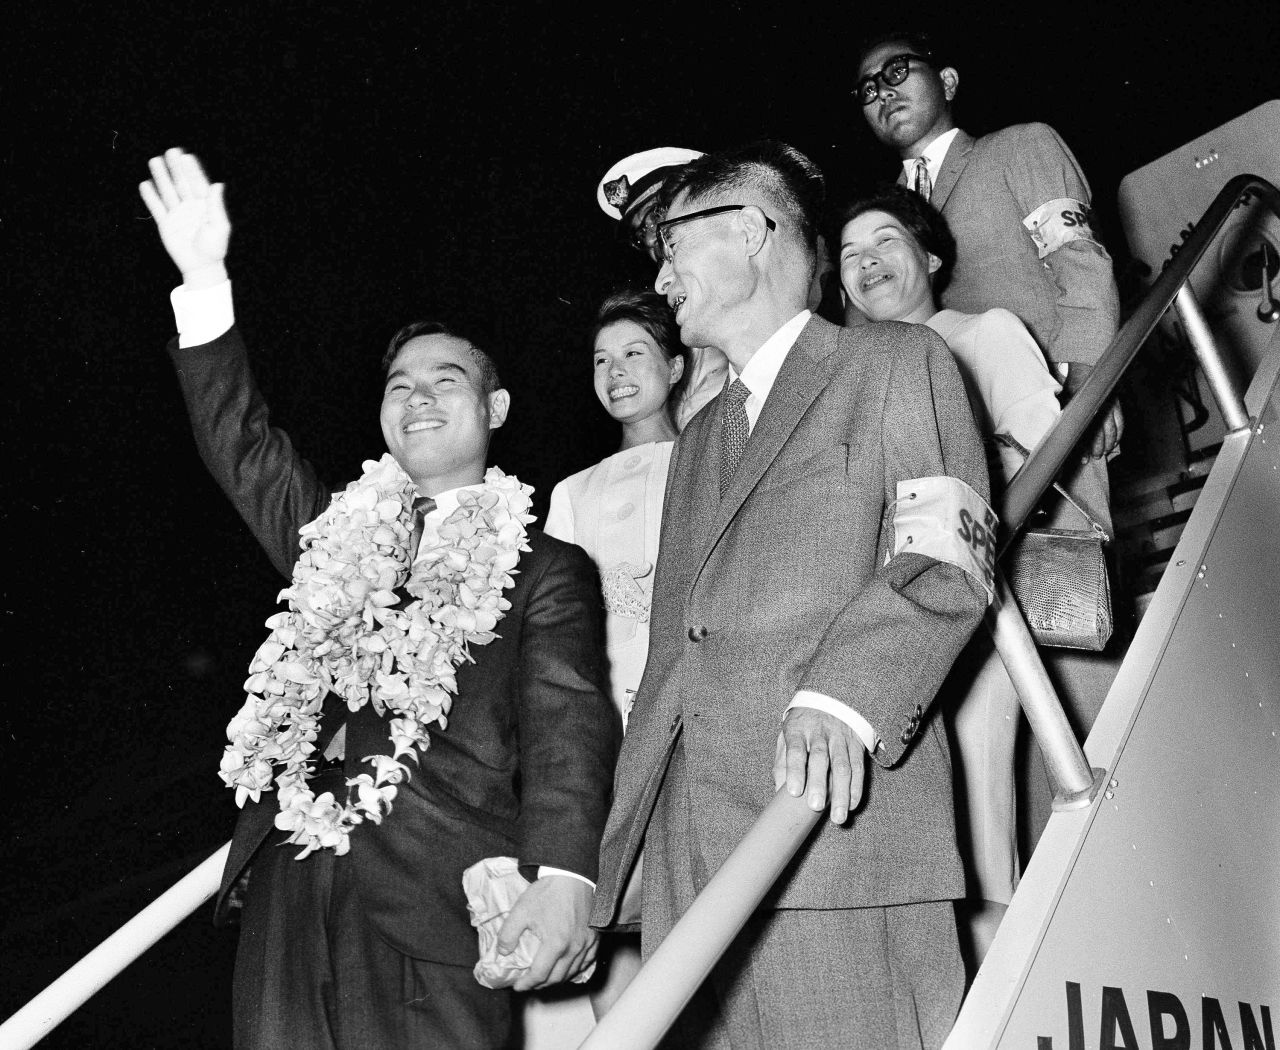 Horie, then aged 23, greeted by his parents and sister upon returning to Japan in 1963.